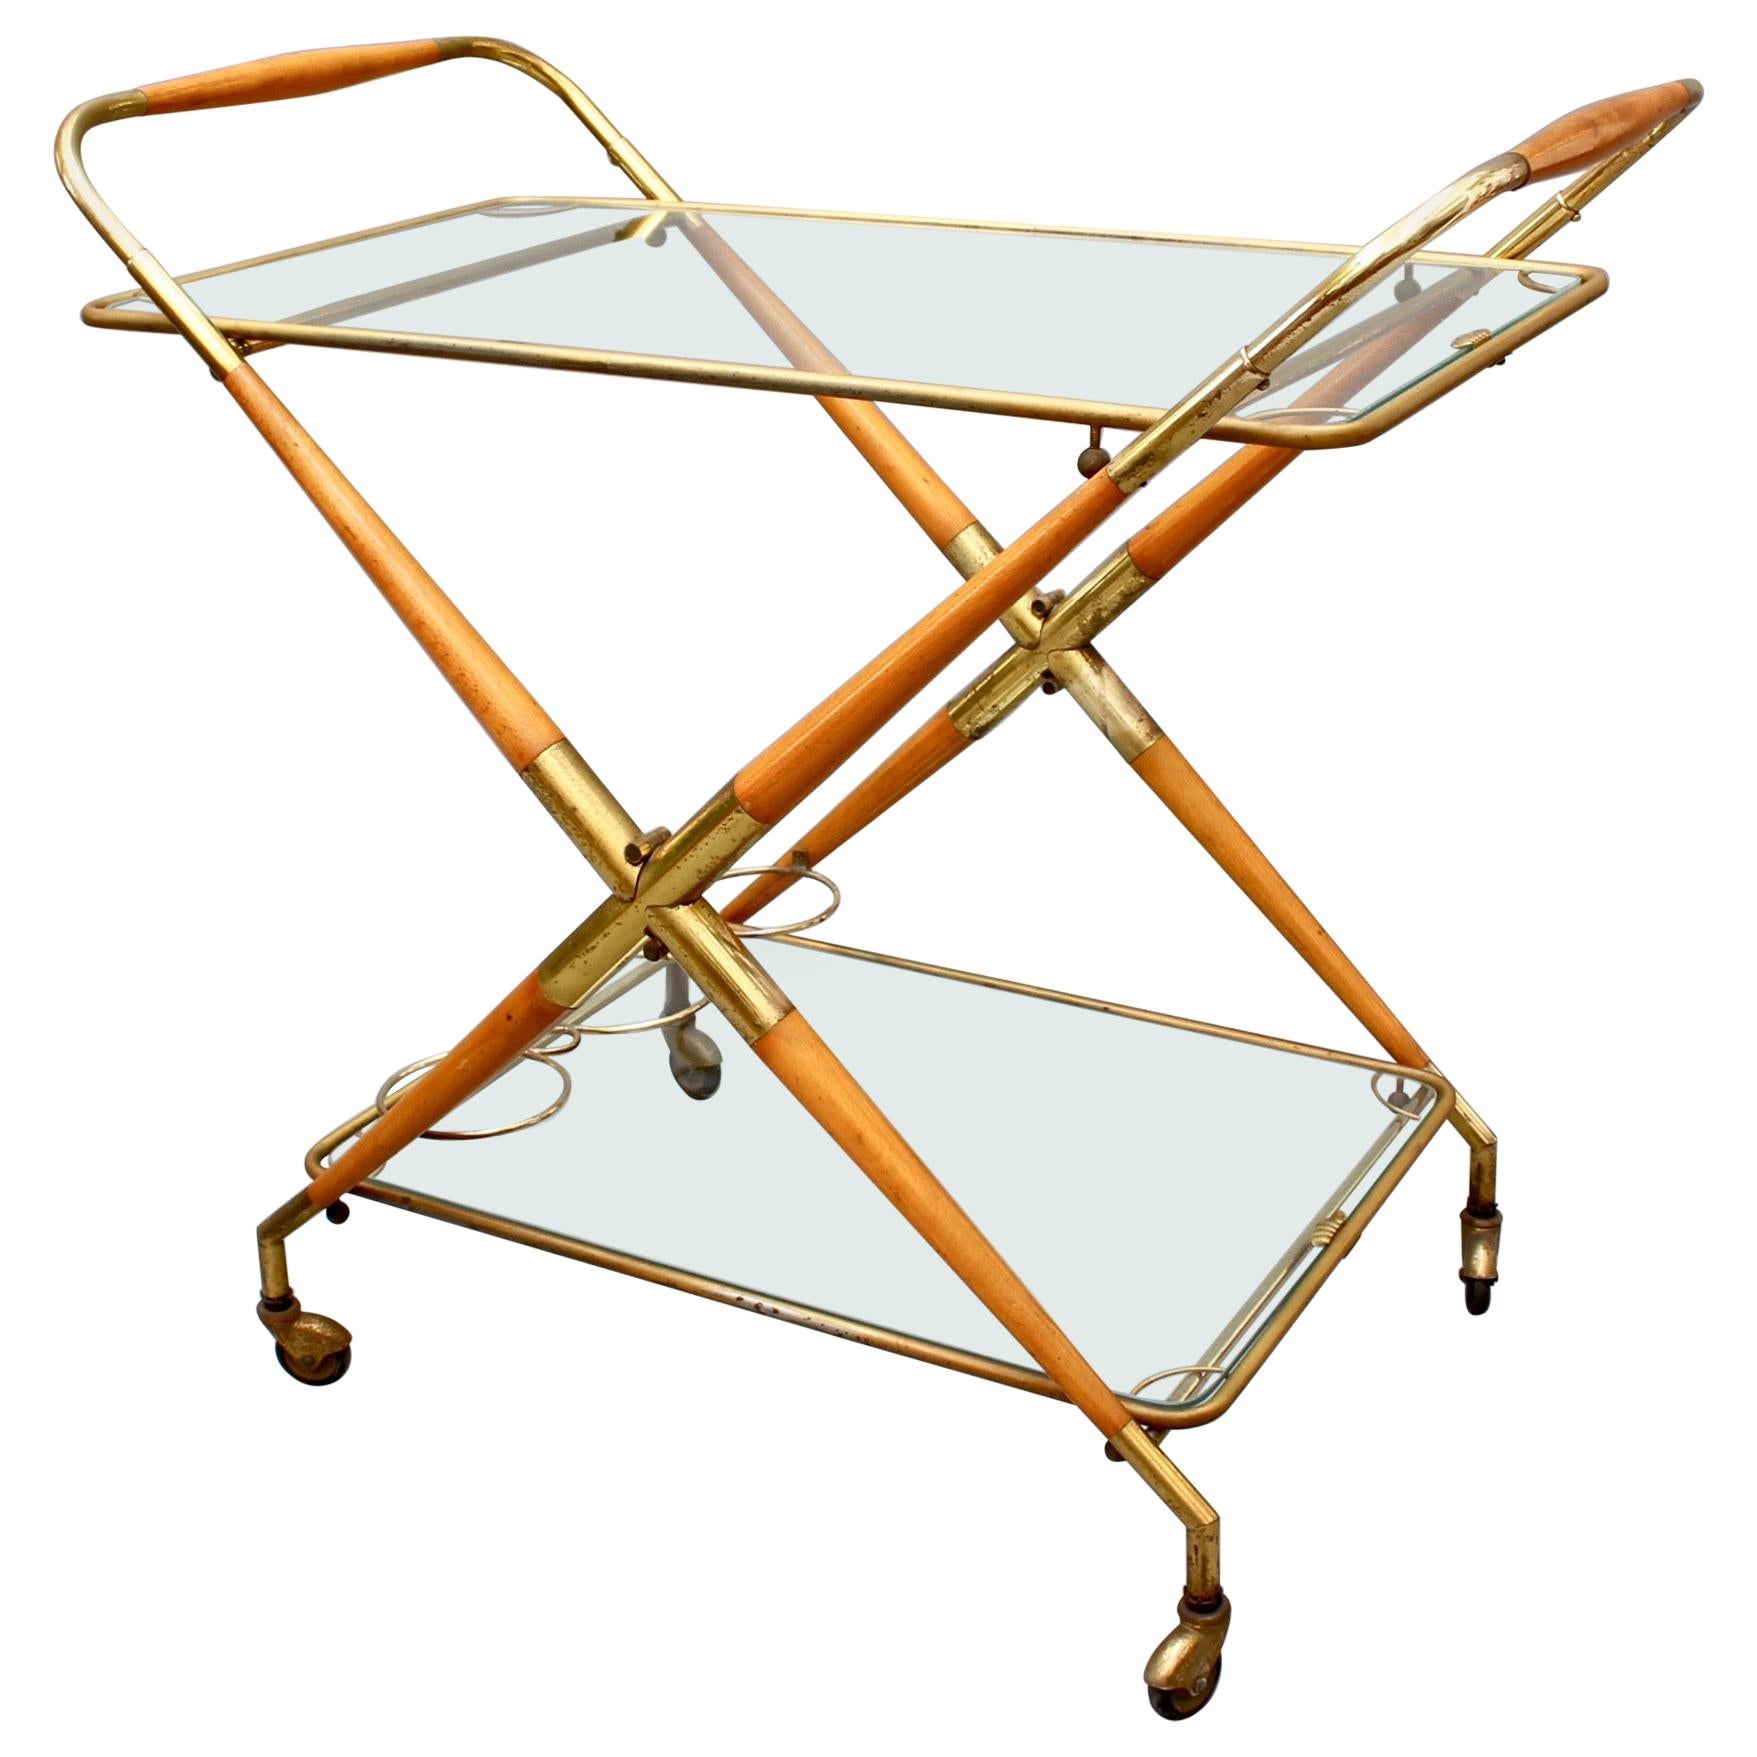 Vintage Italian Serving Trolley or Bar Cart by Cesare Lacca, circa 1950s